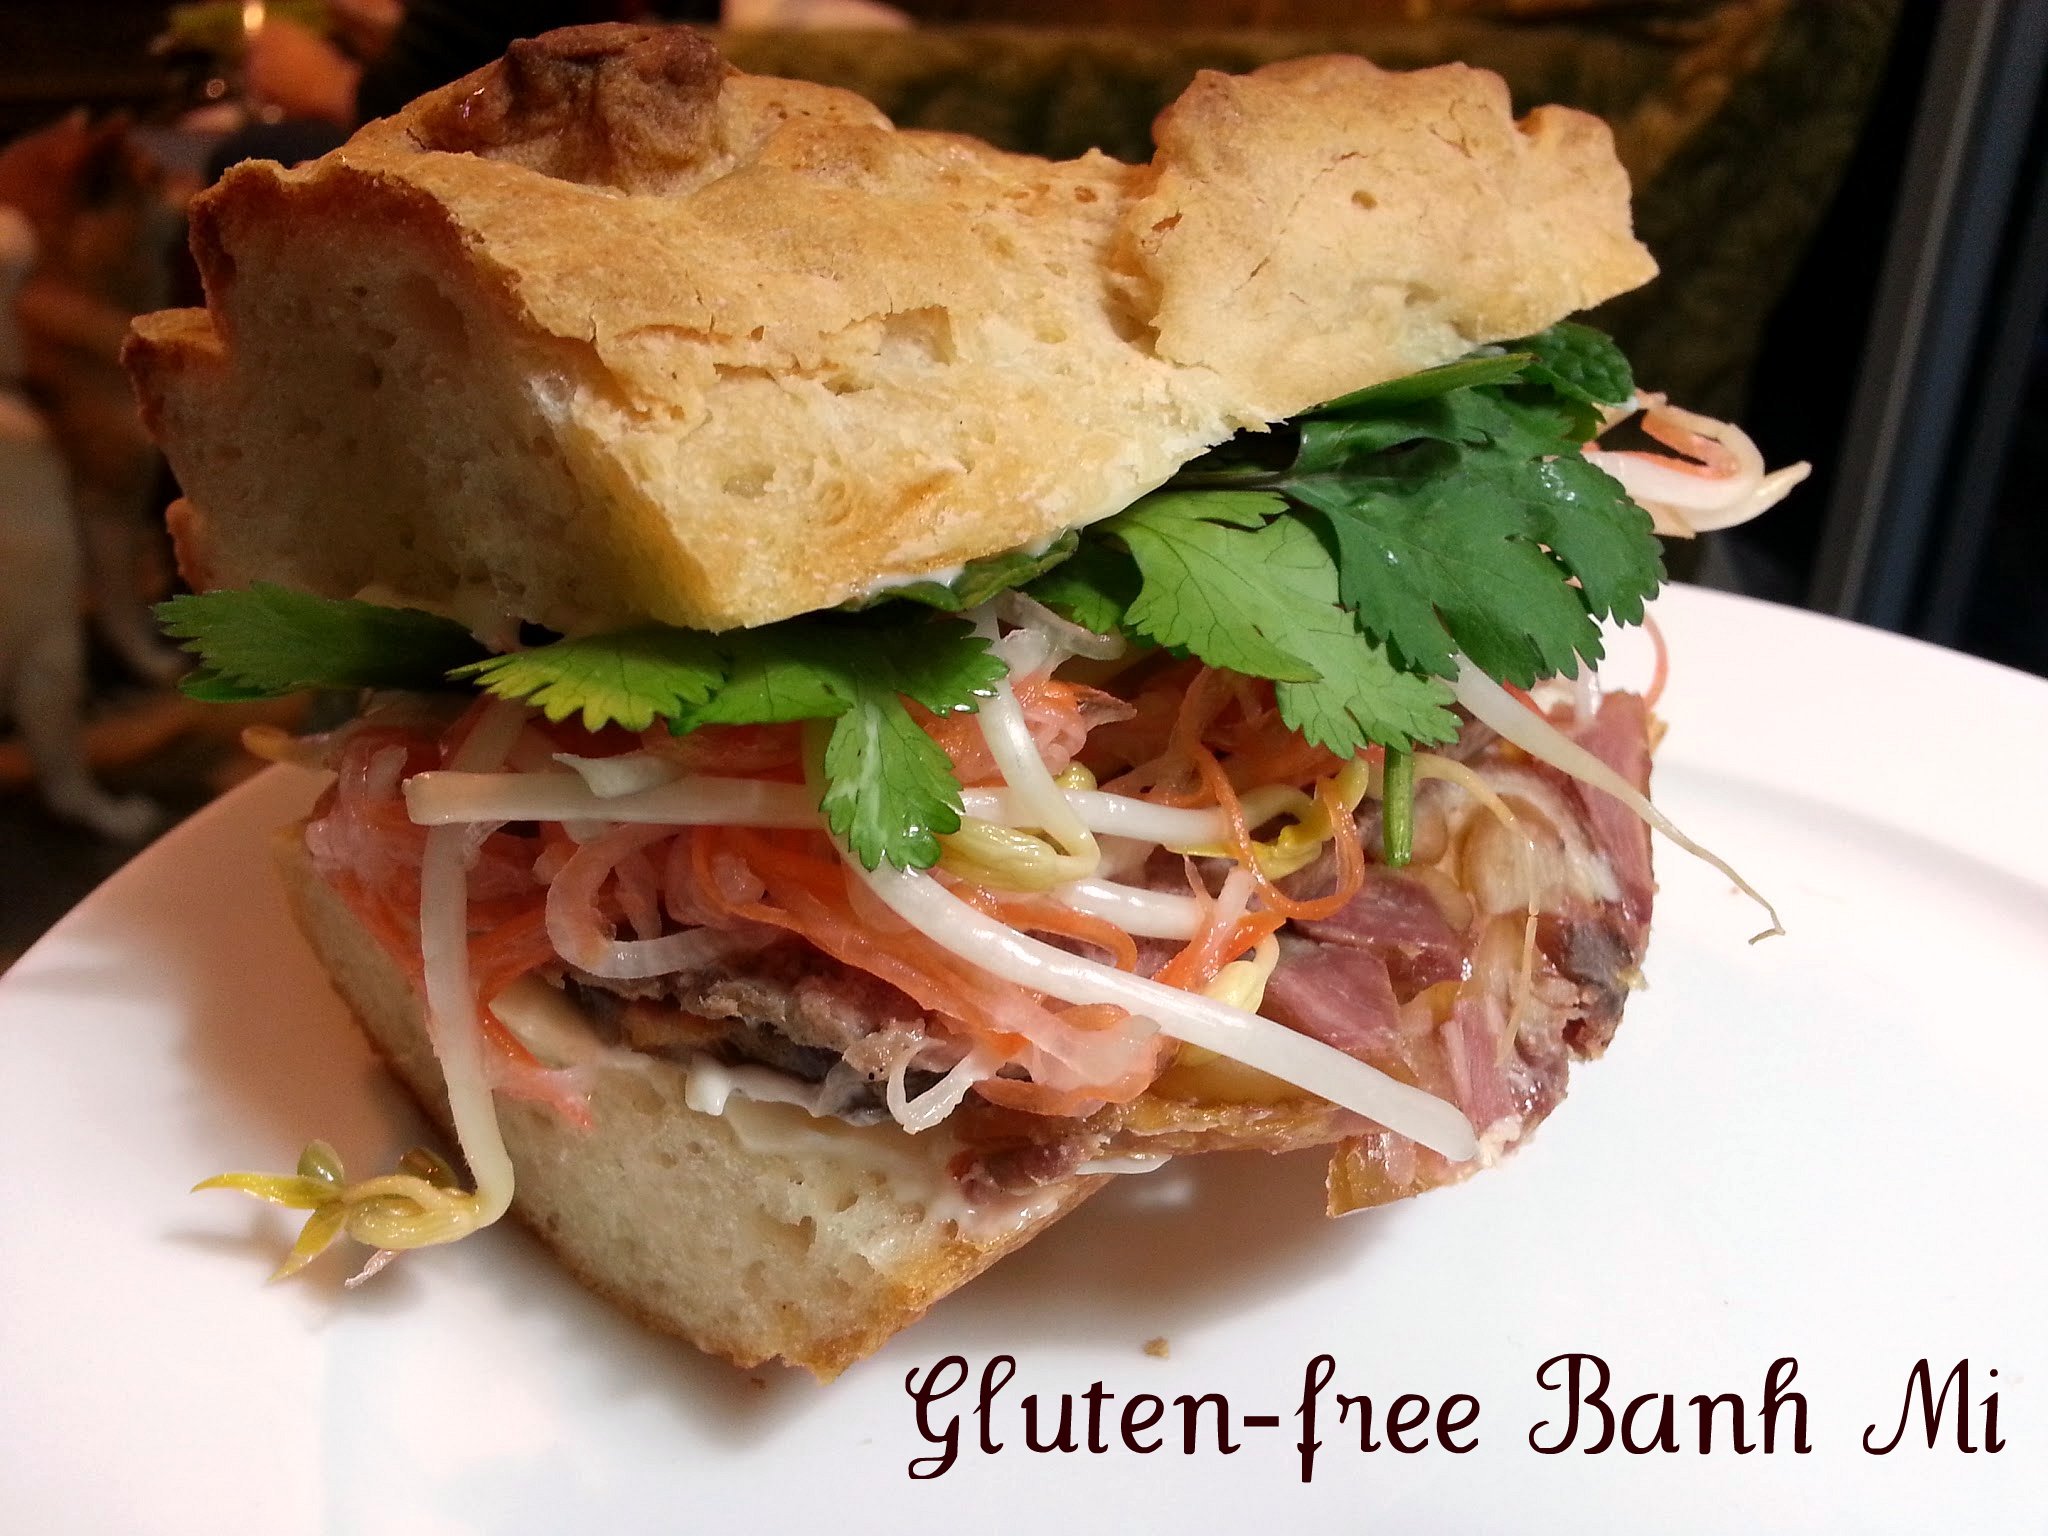 Gluten-free Banh Mi … for your Superbowl Party!